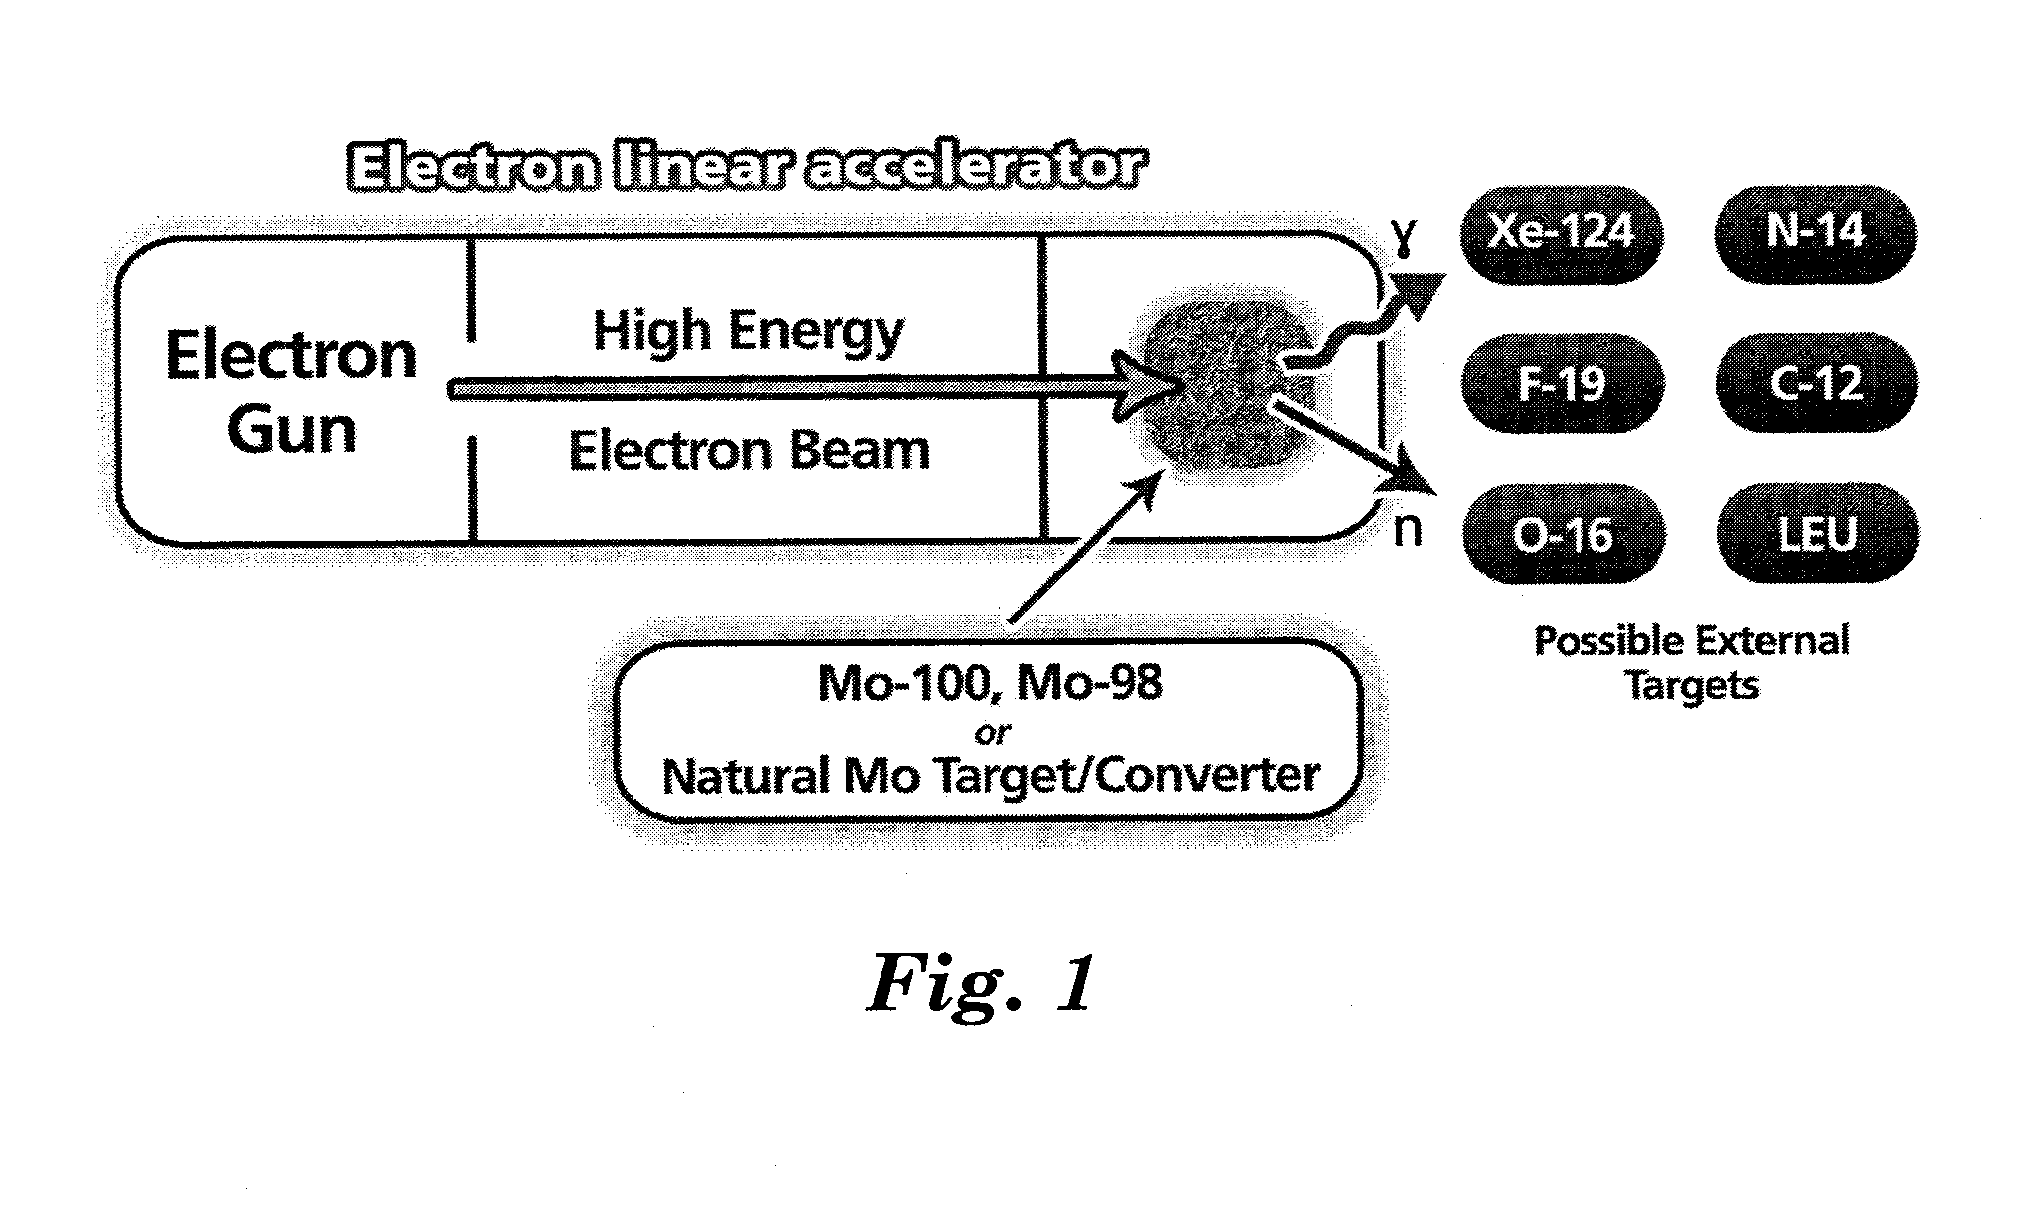 Molybdenum-converter based electron linear accelerator and method for producing radioisotopes